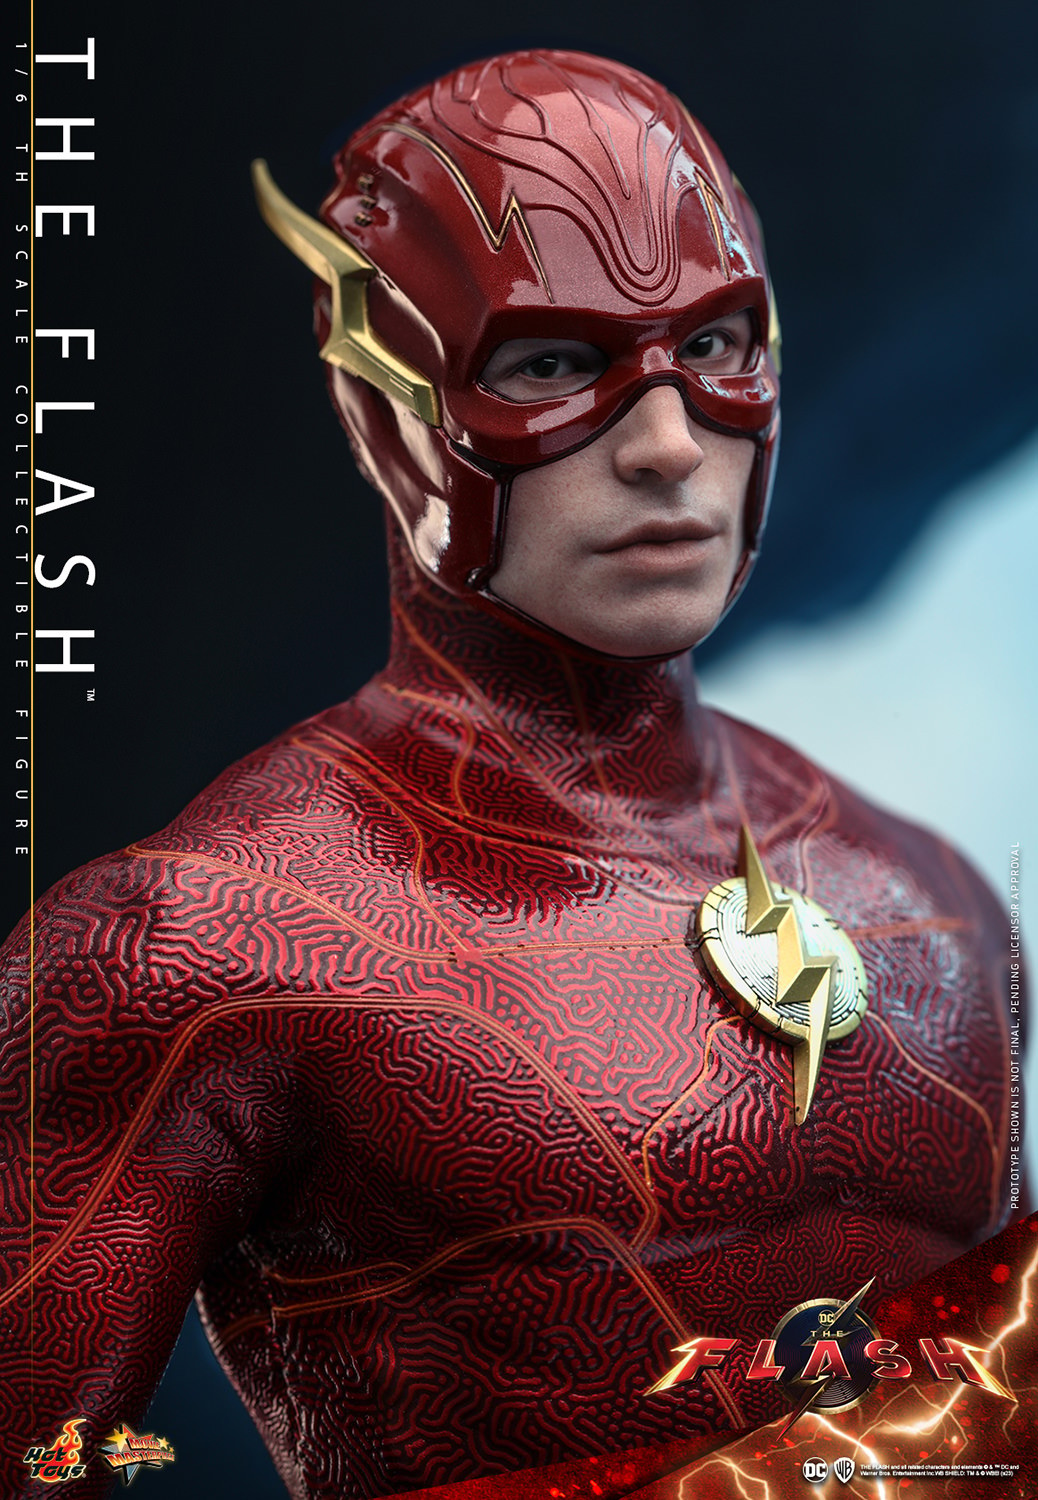 The Flash Collector Edition (Prototype Shown) View 13